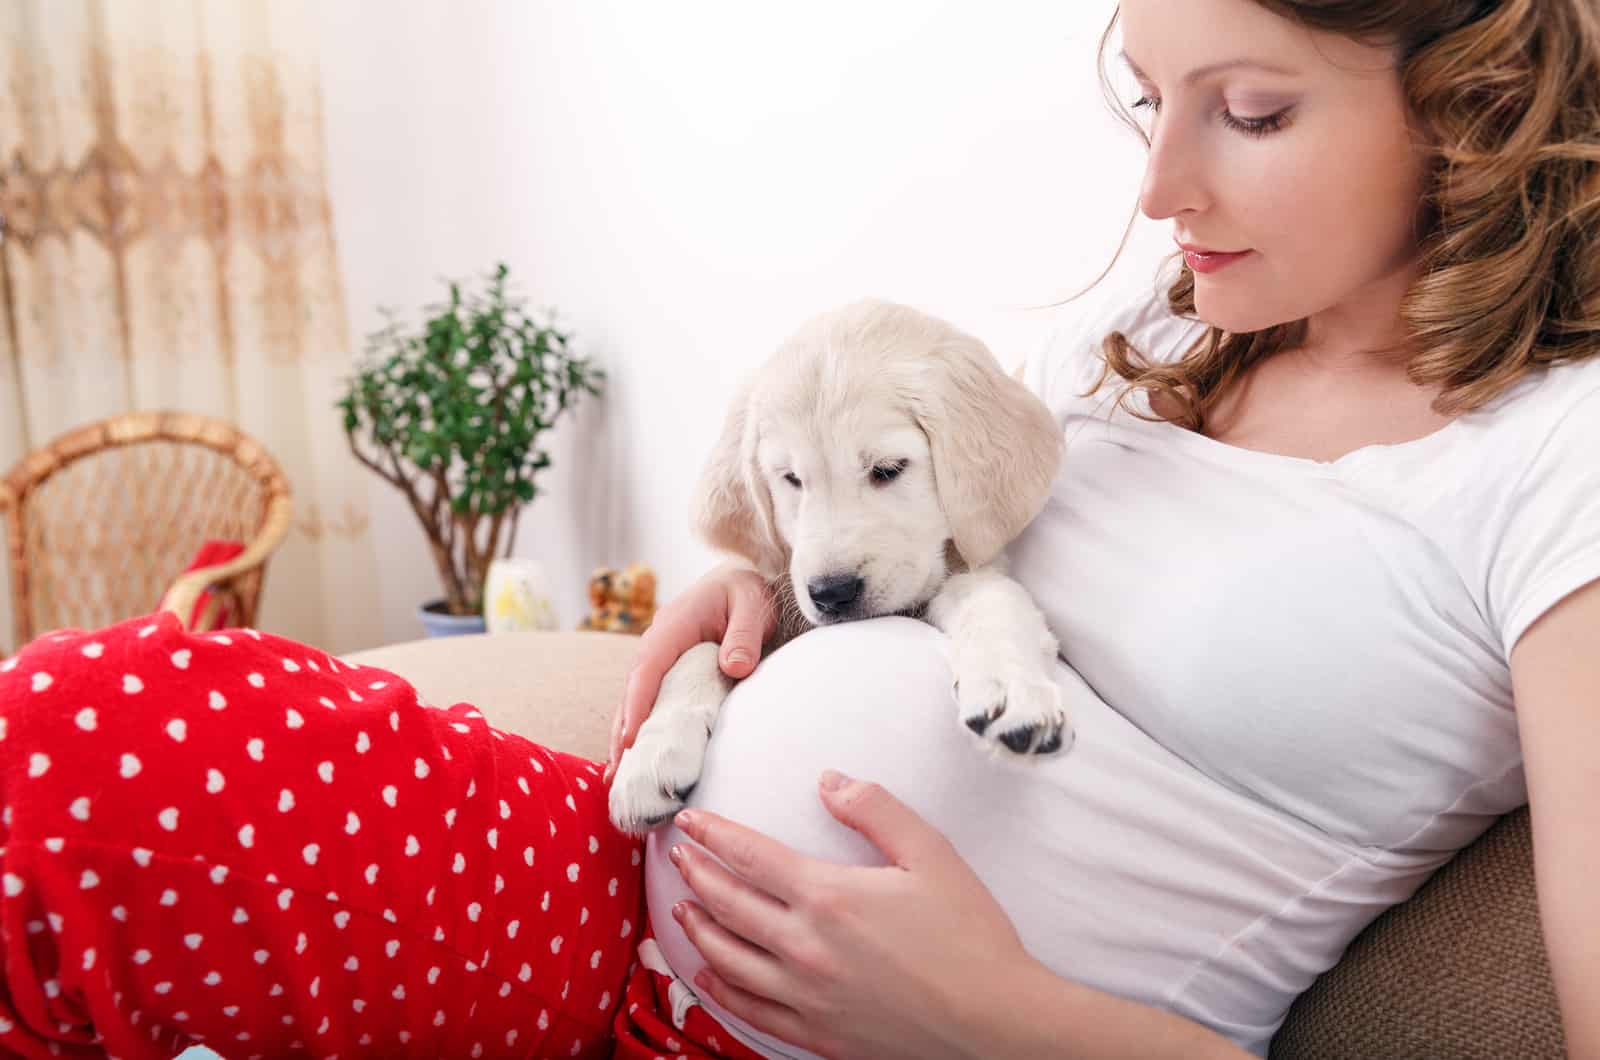 pregnant women with dog on her stomach